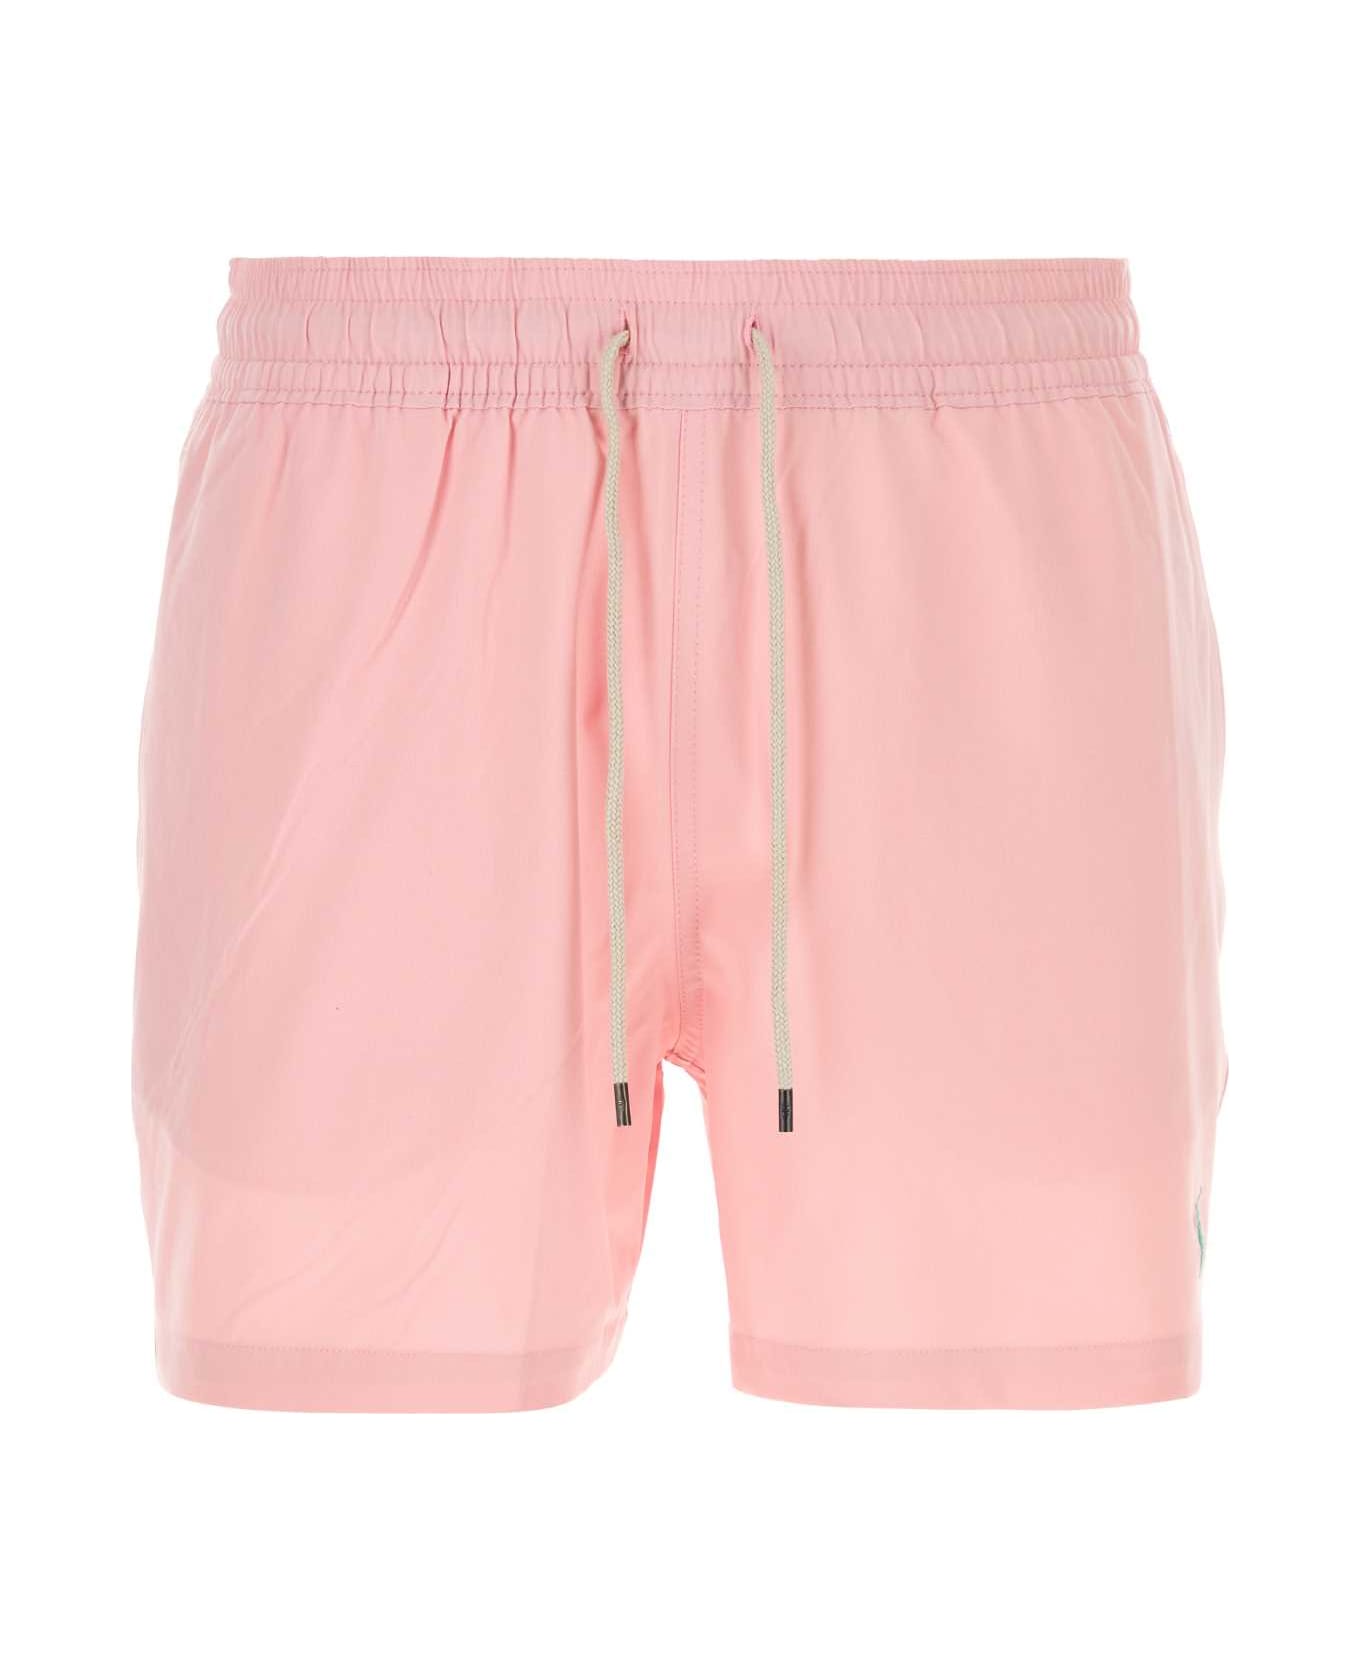 Polo Ralph Lauren Pink Stretch Polyester Swimming Shorts - GARDENPINK